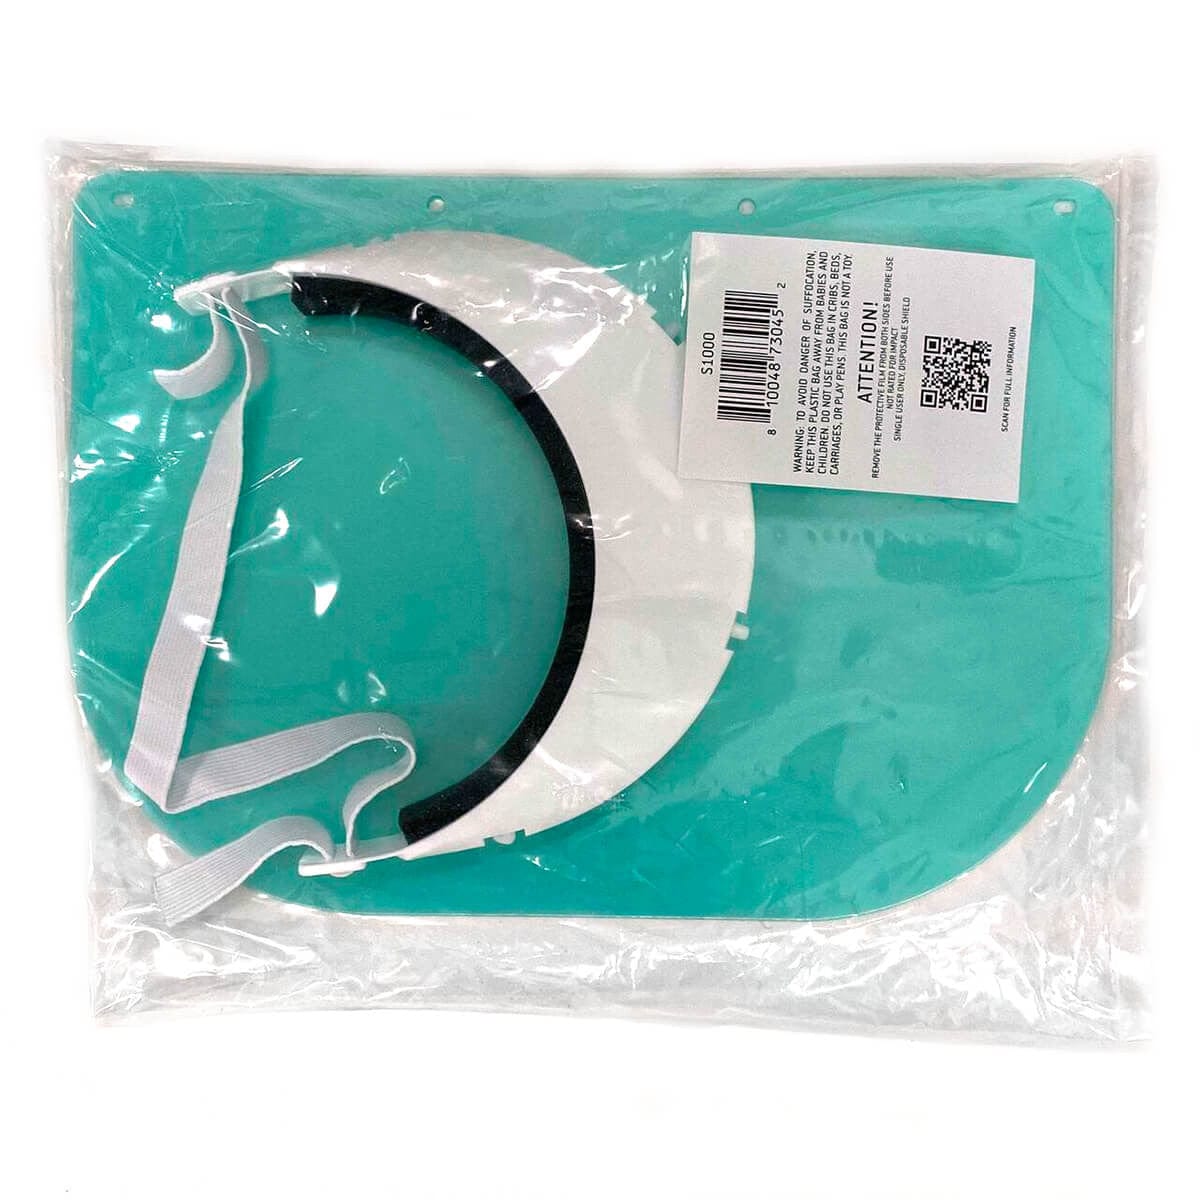 Pyramex S1000 Polycarbonate Medical Face Shield Kit - Packaging